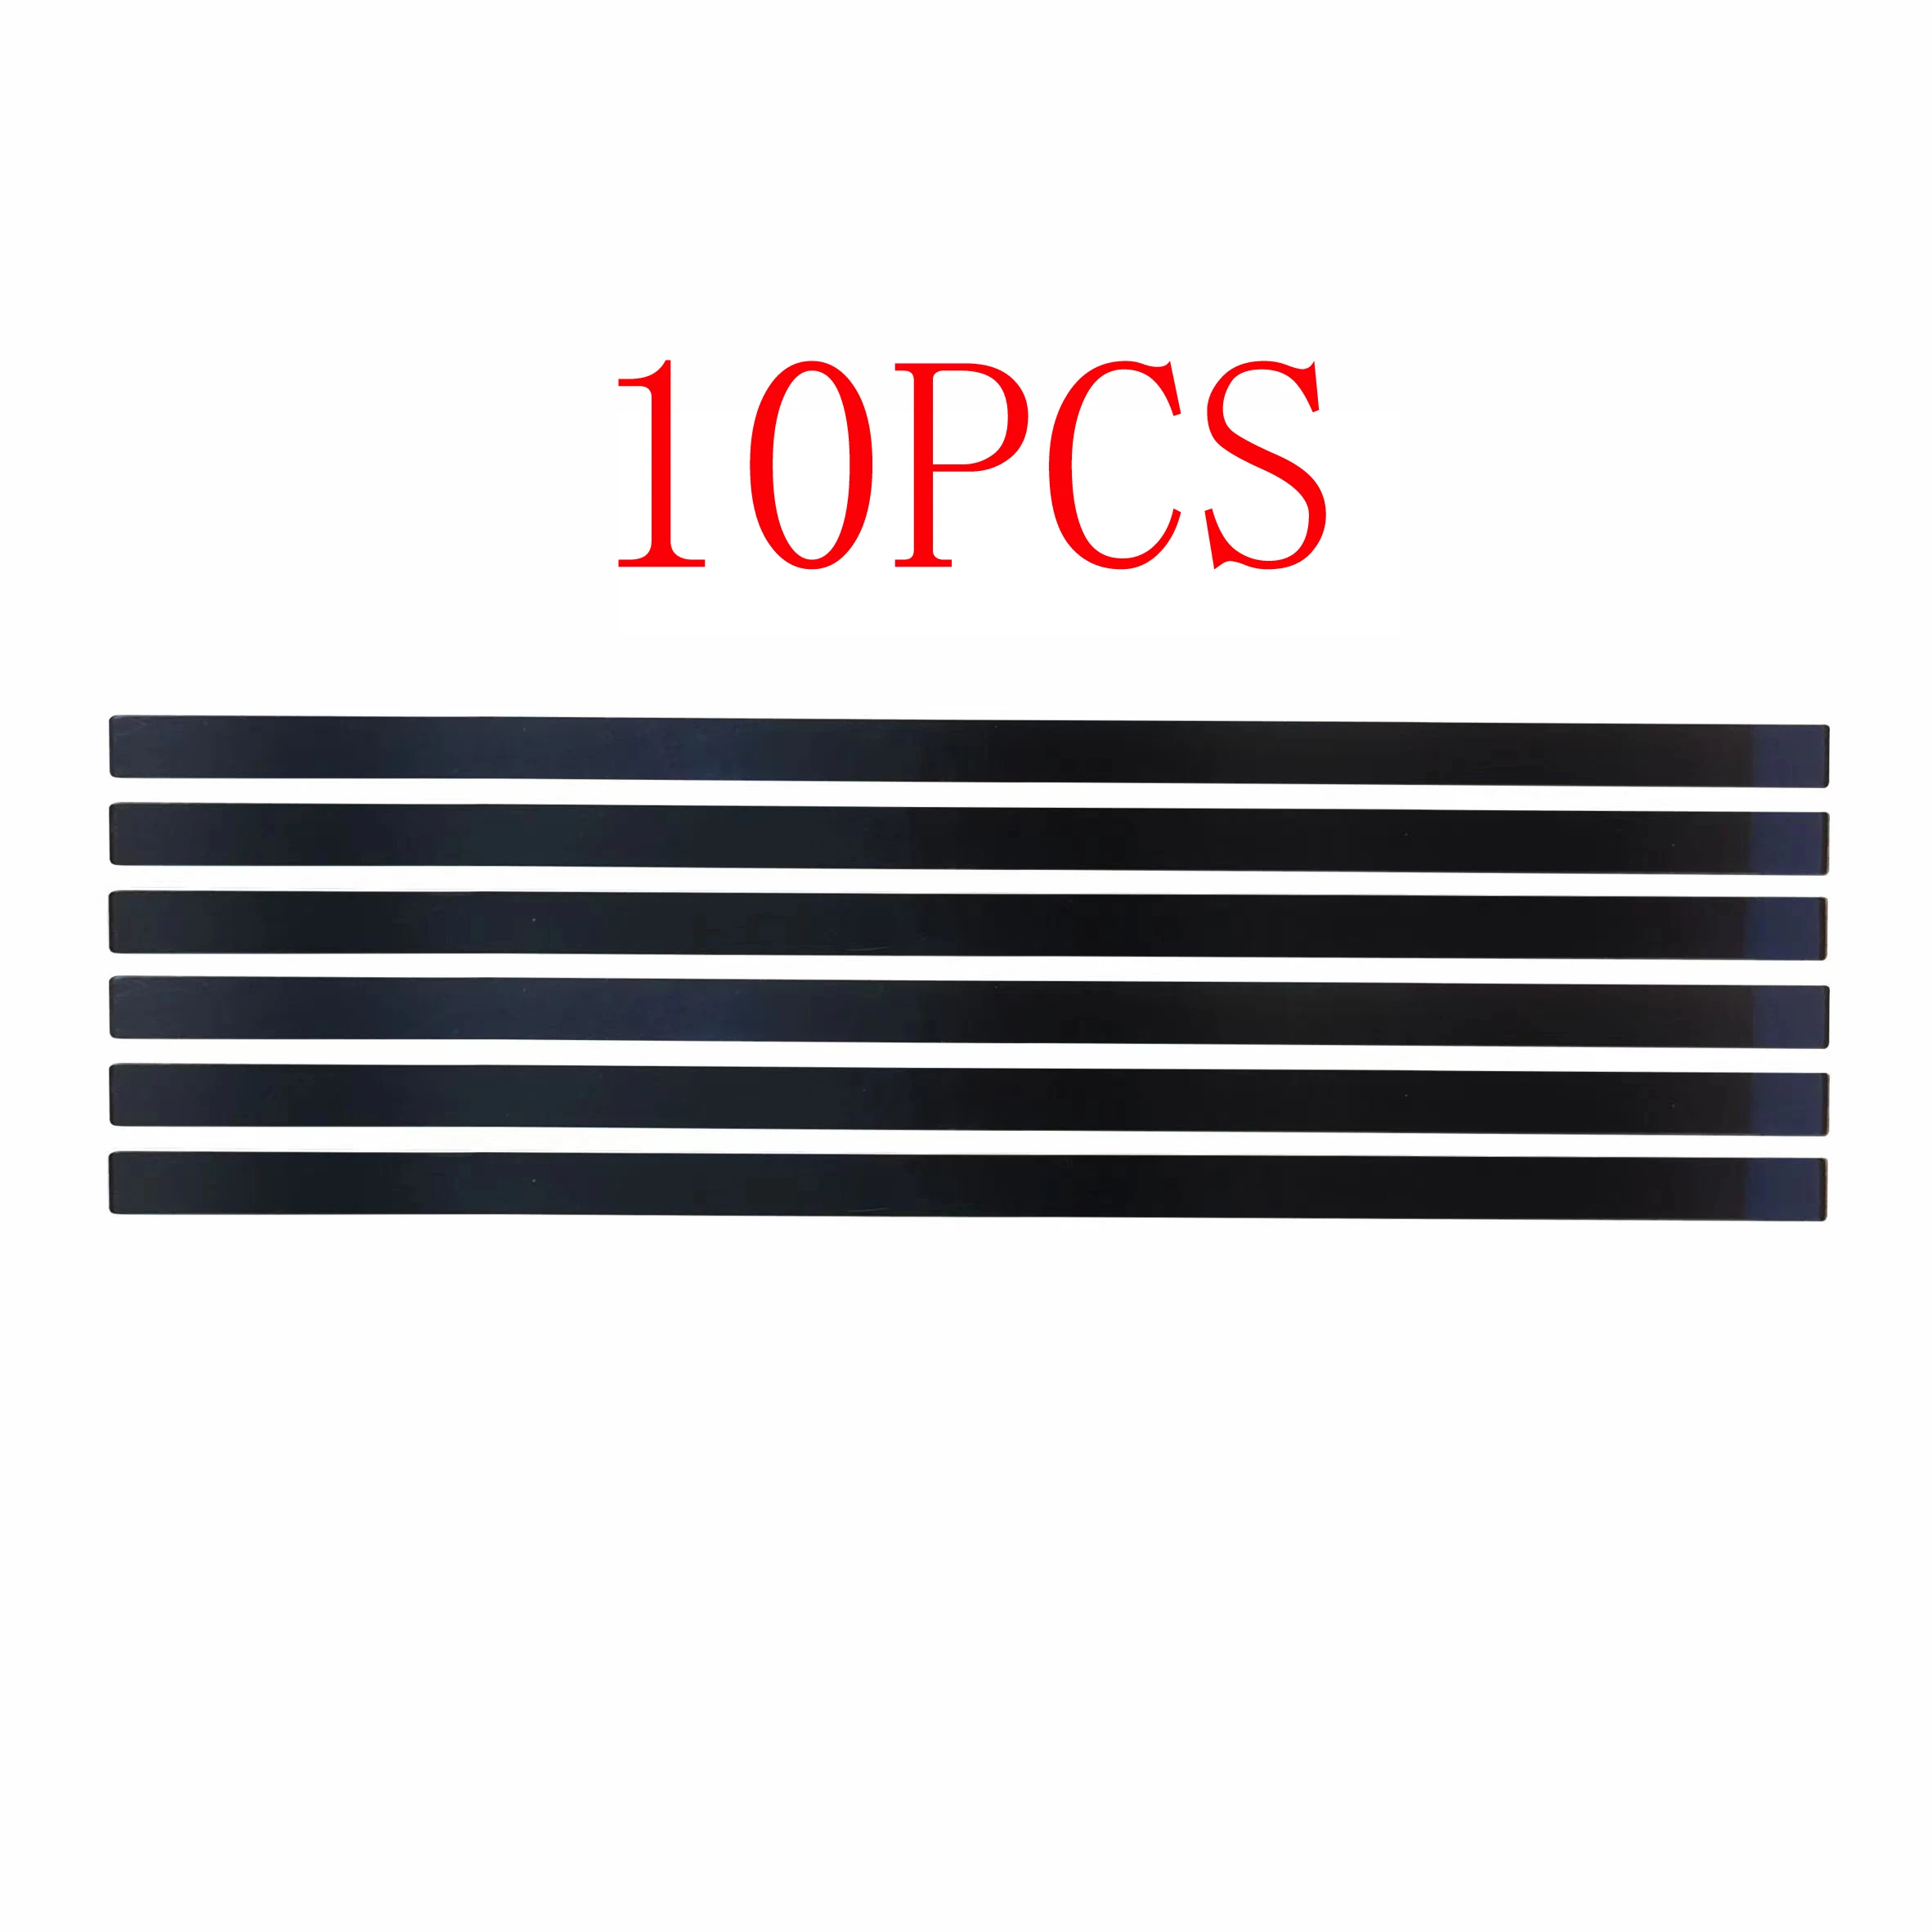 10pcs New Pull Tabs Stretch Release Adhesive Strips for LCD Screen  with/without Handle - Black/White